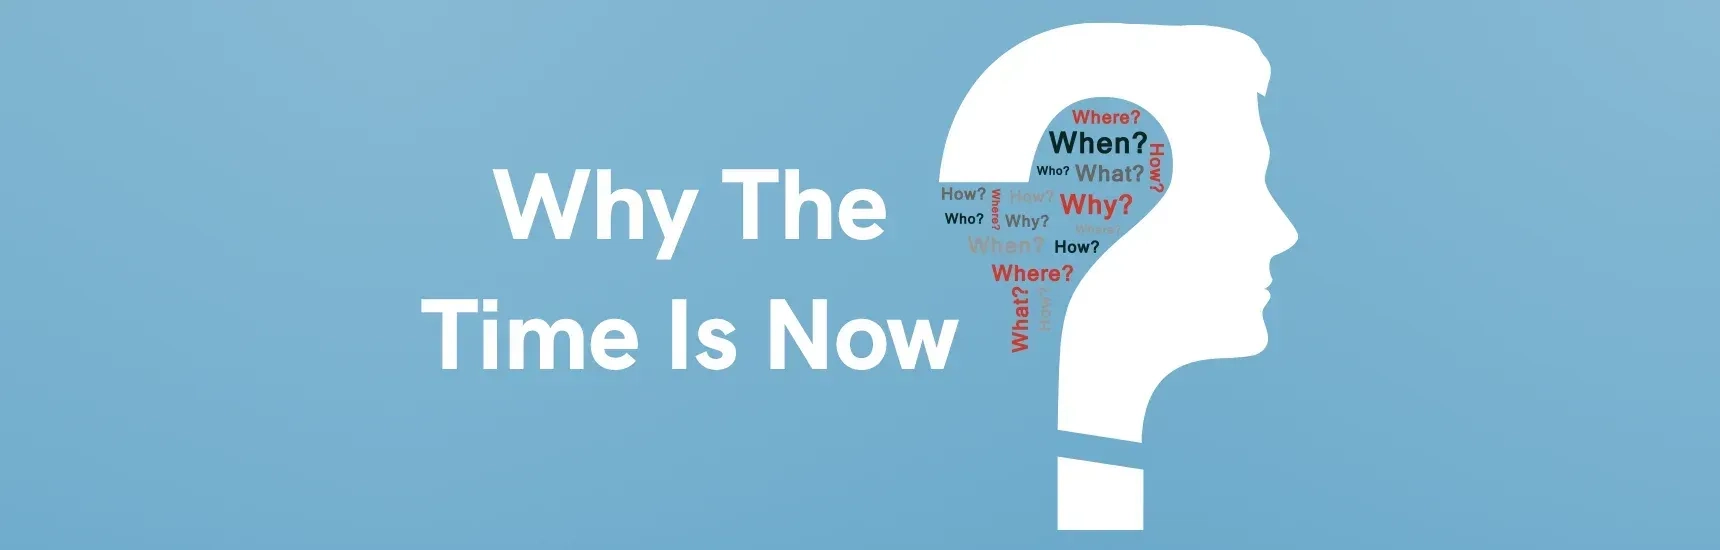 Why_the_time_is_now